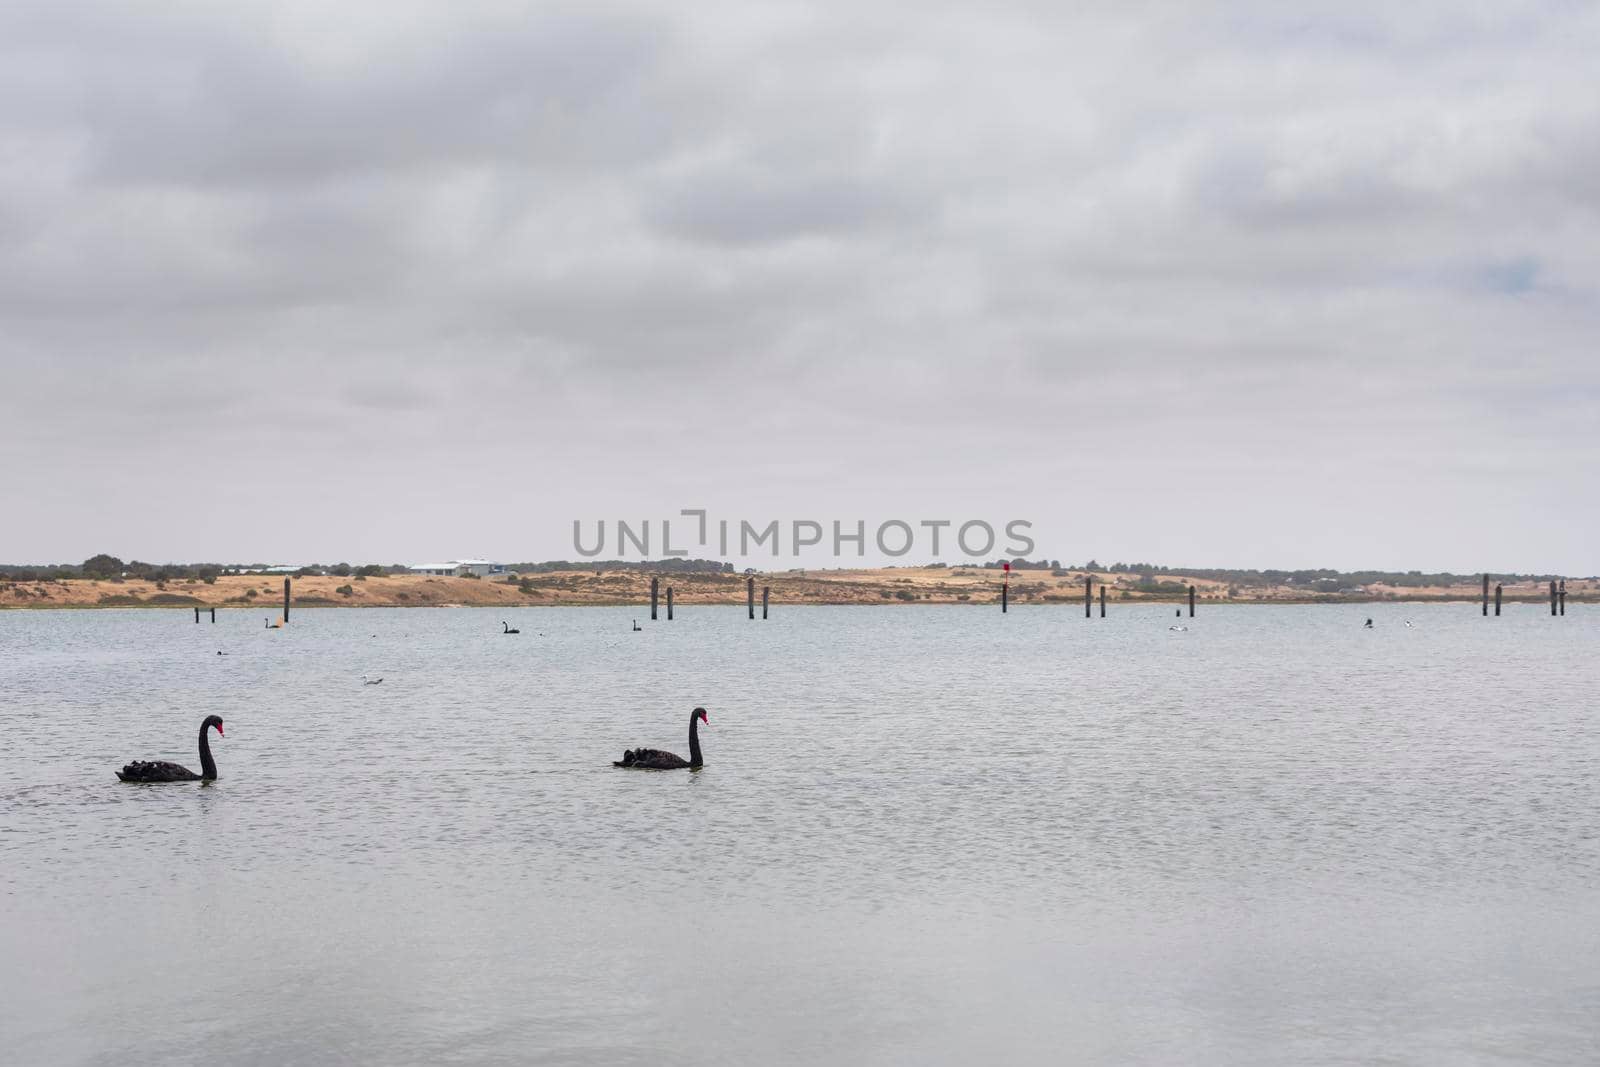 Two black swans paddling in a large estuary near the mouth of the River Murray in Goolwa